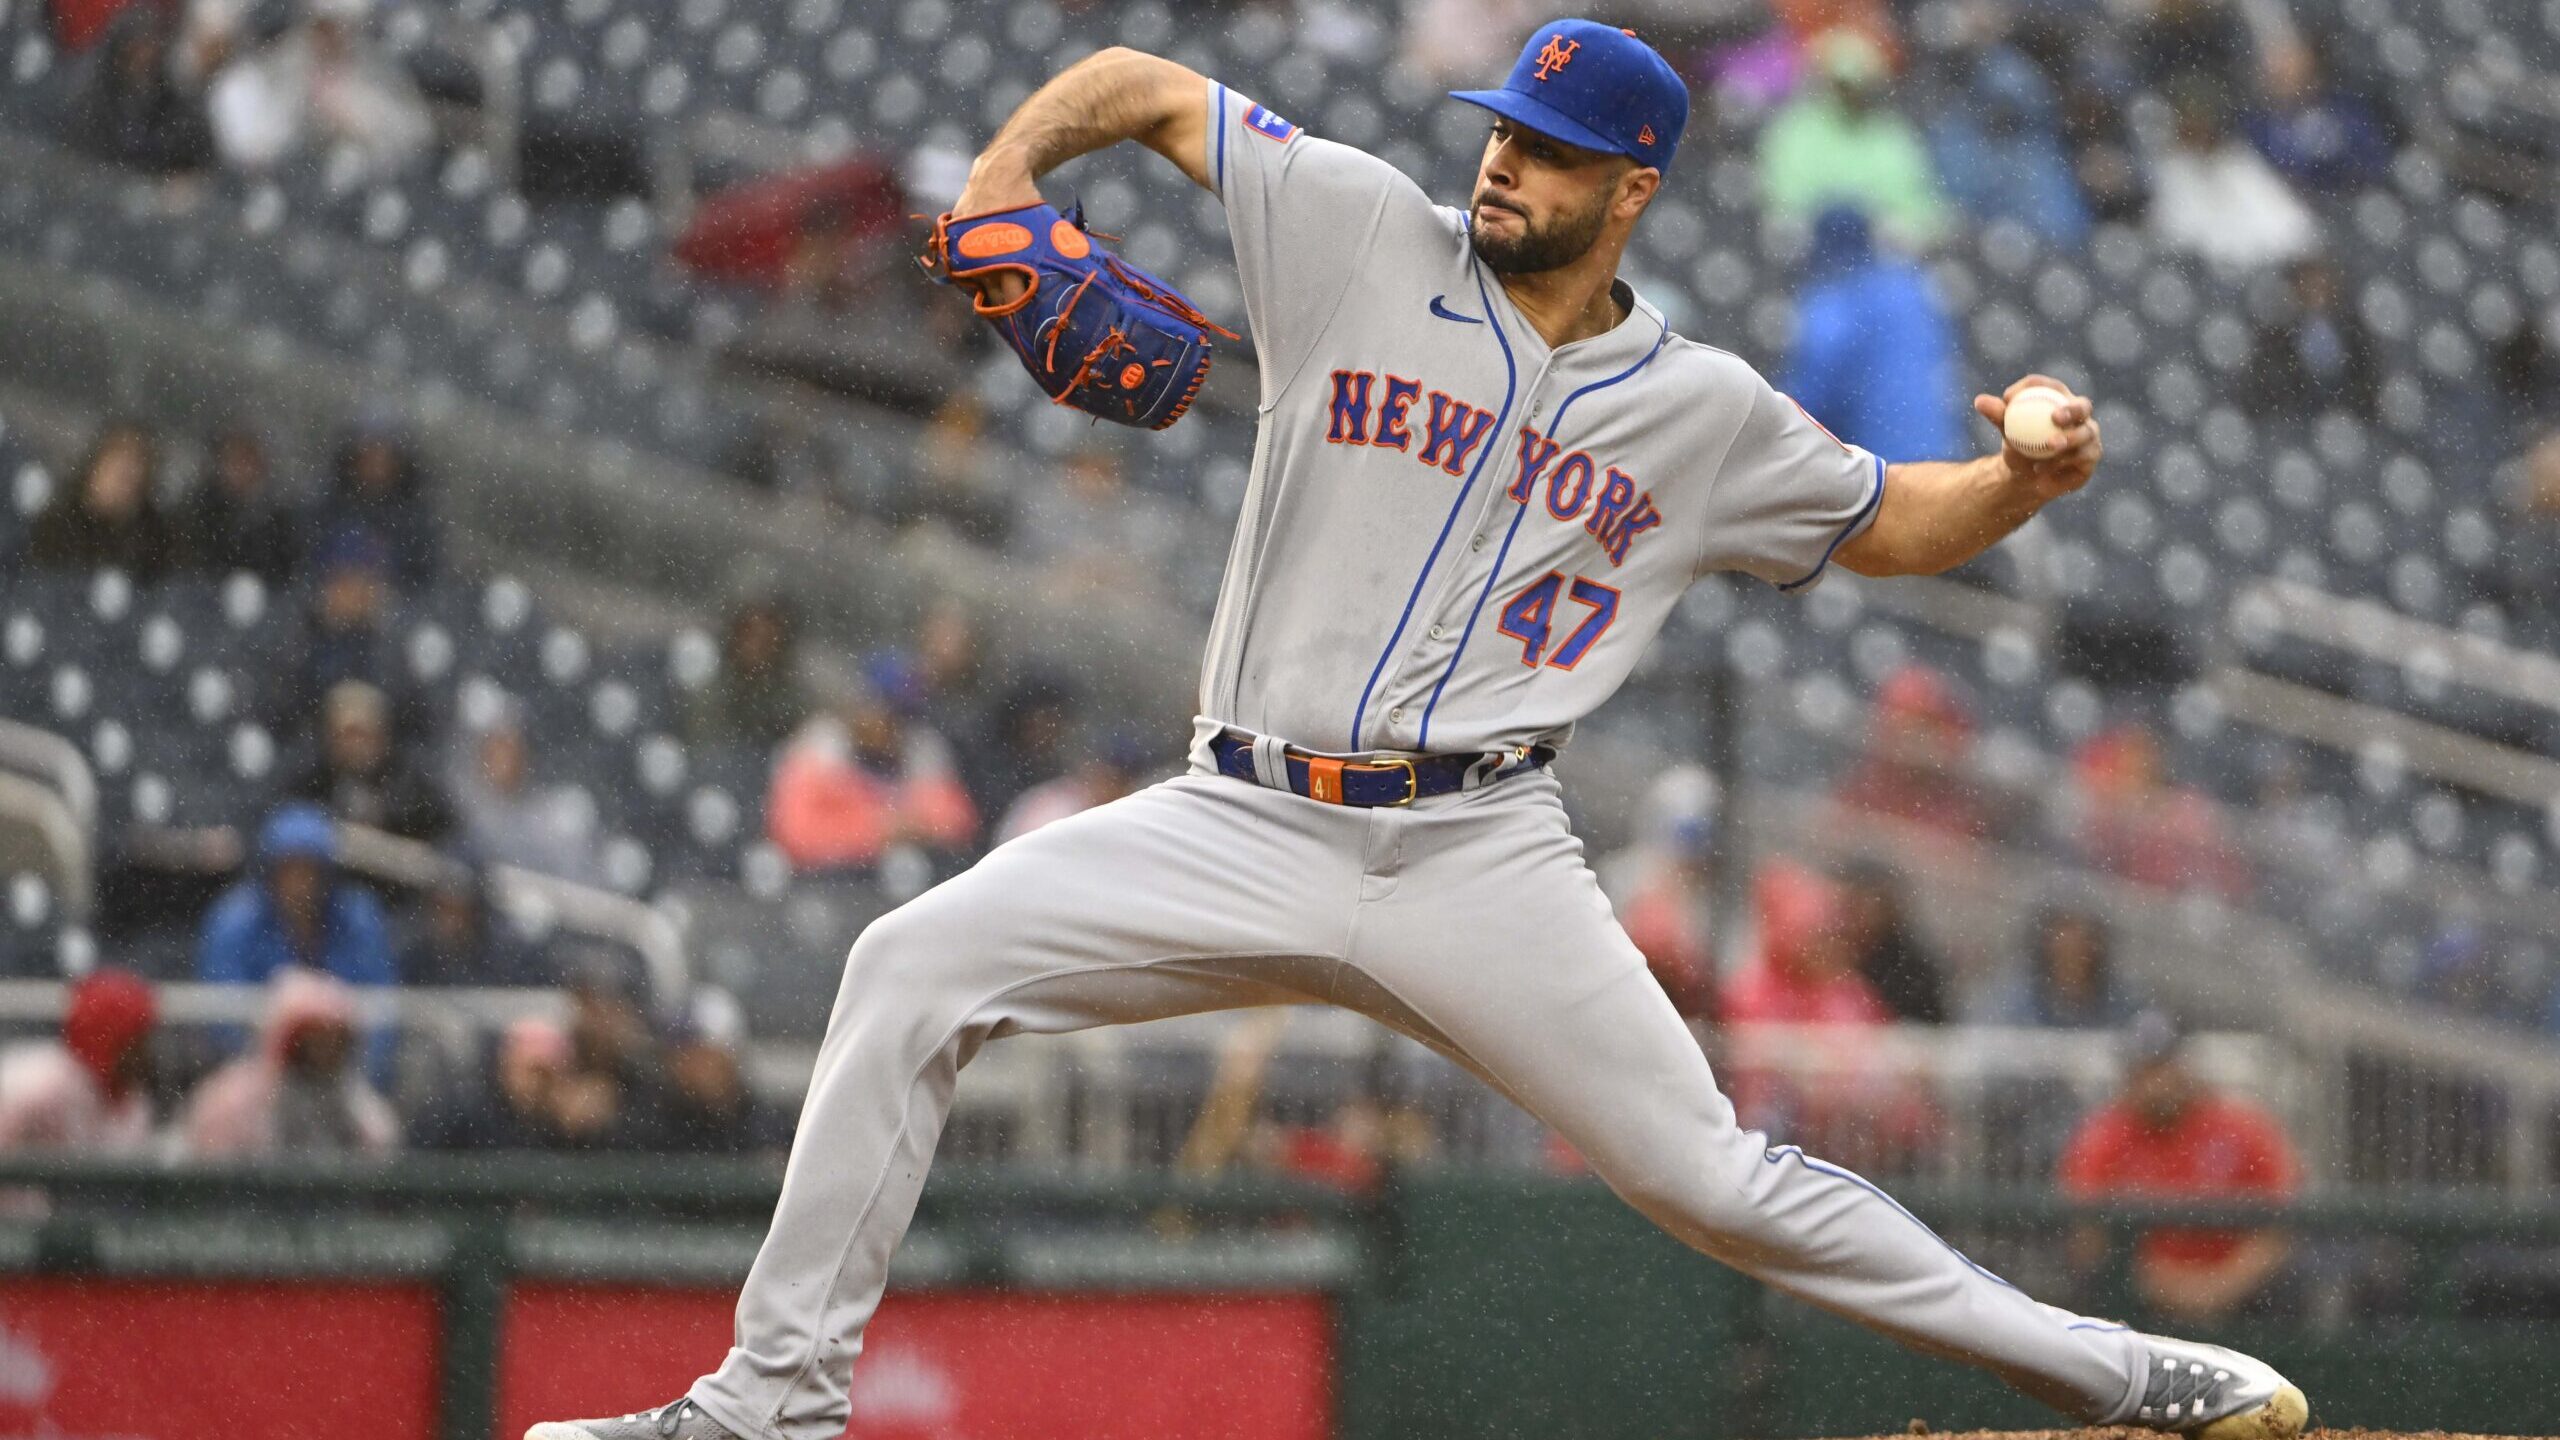 Syracuse Mets pitcher Joey Lucchesi named International Pitcher of